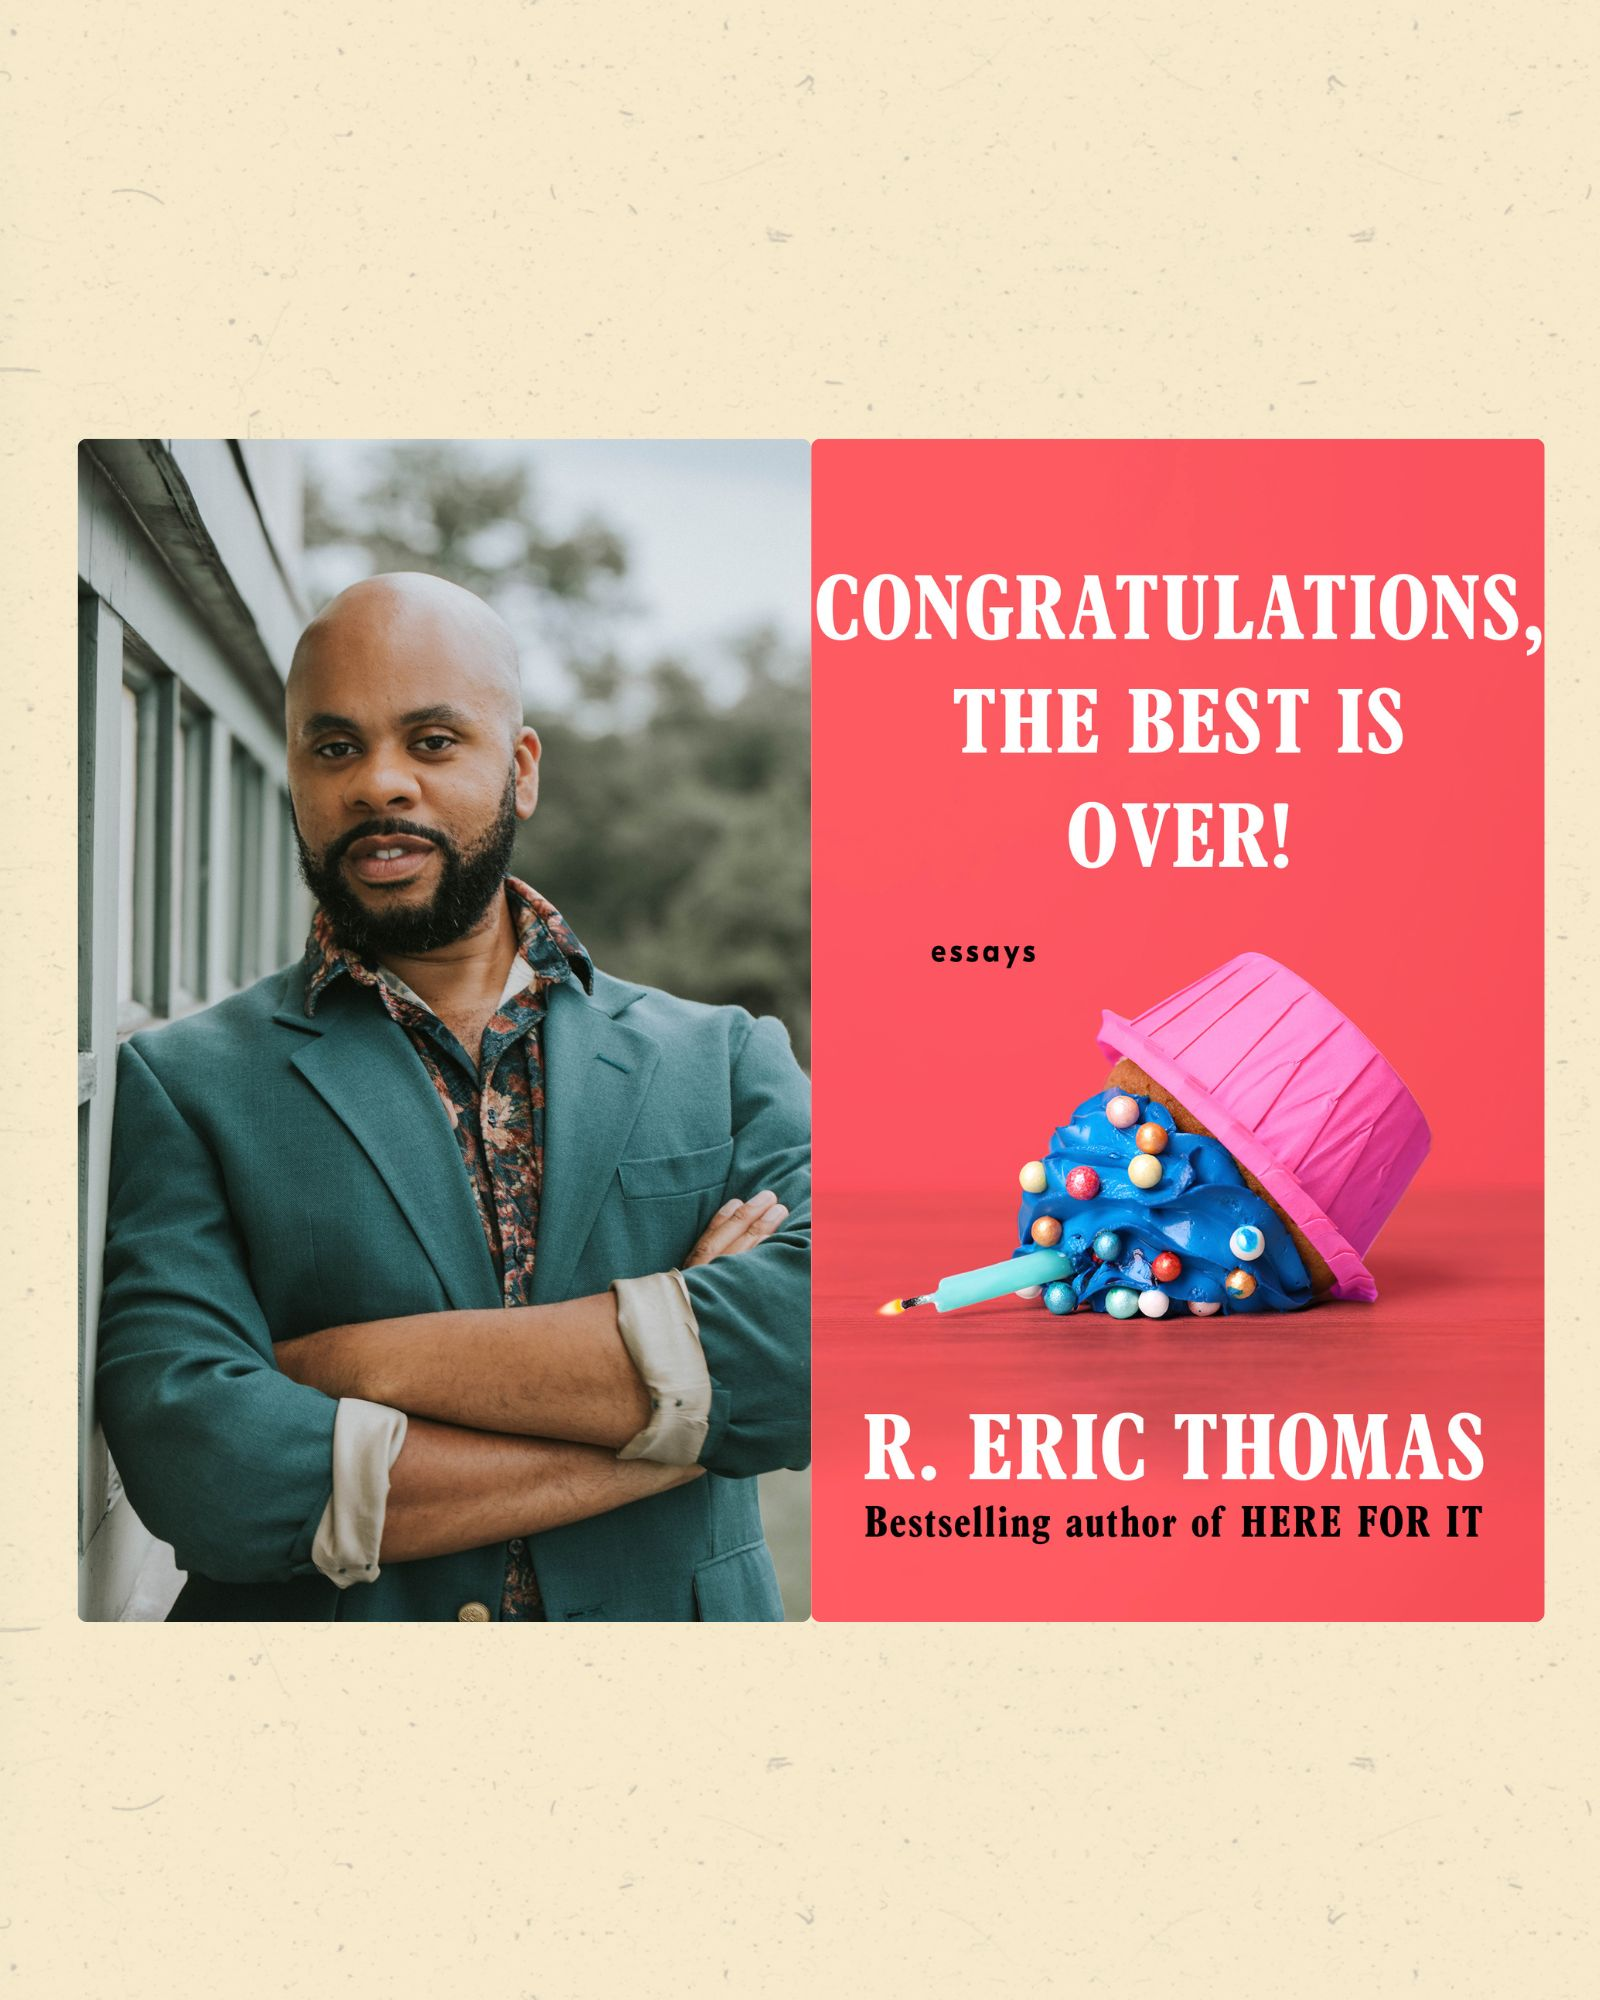 "Congratulations! The Best is Over." Or is it, asks R. Eric Thomas